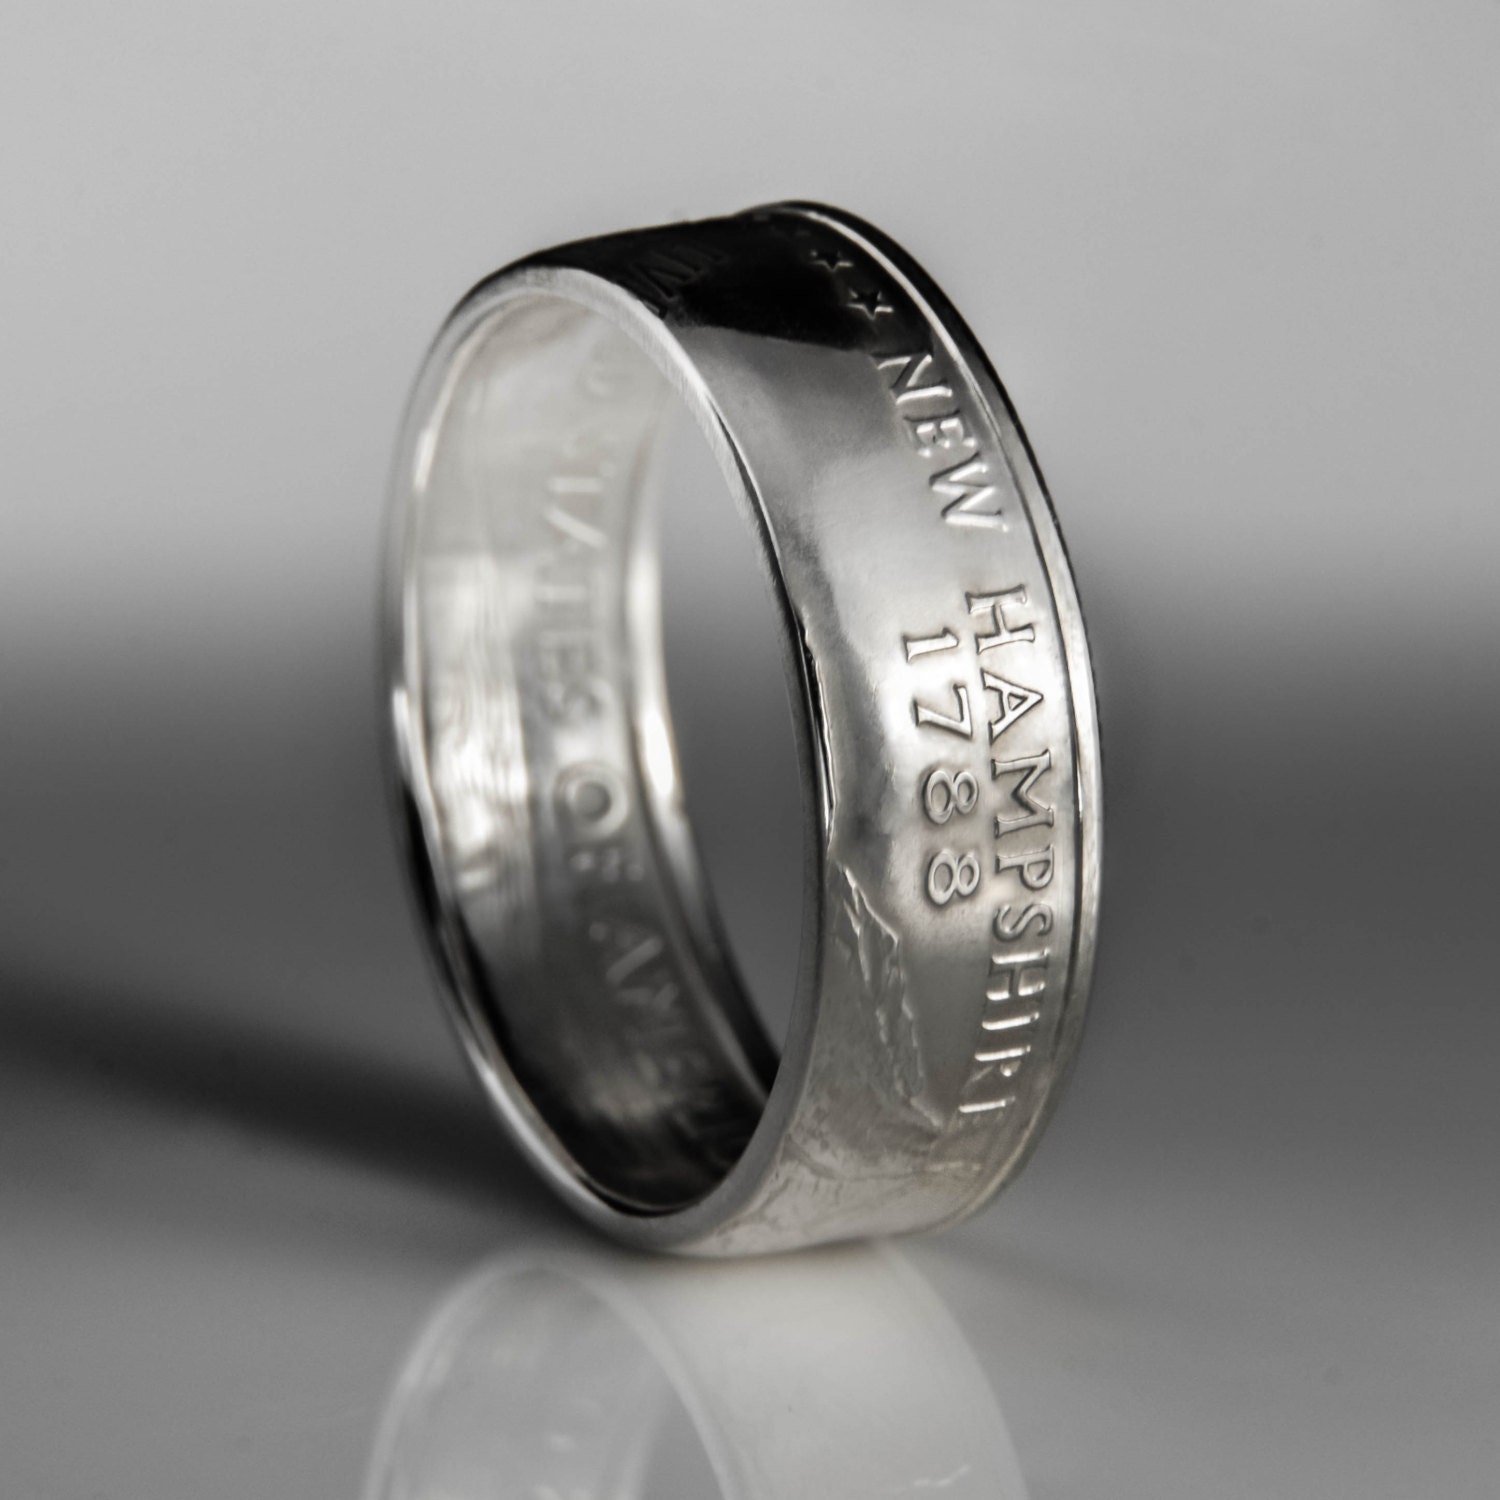 New Hampshire Quarter Coin Ring SILVER .900